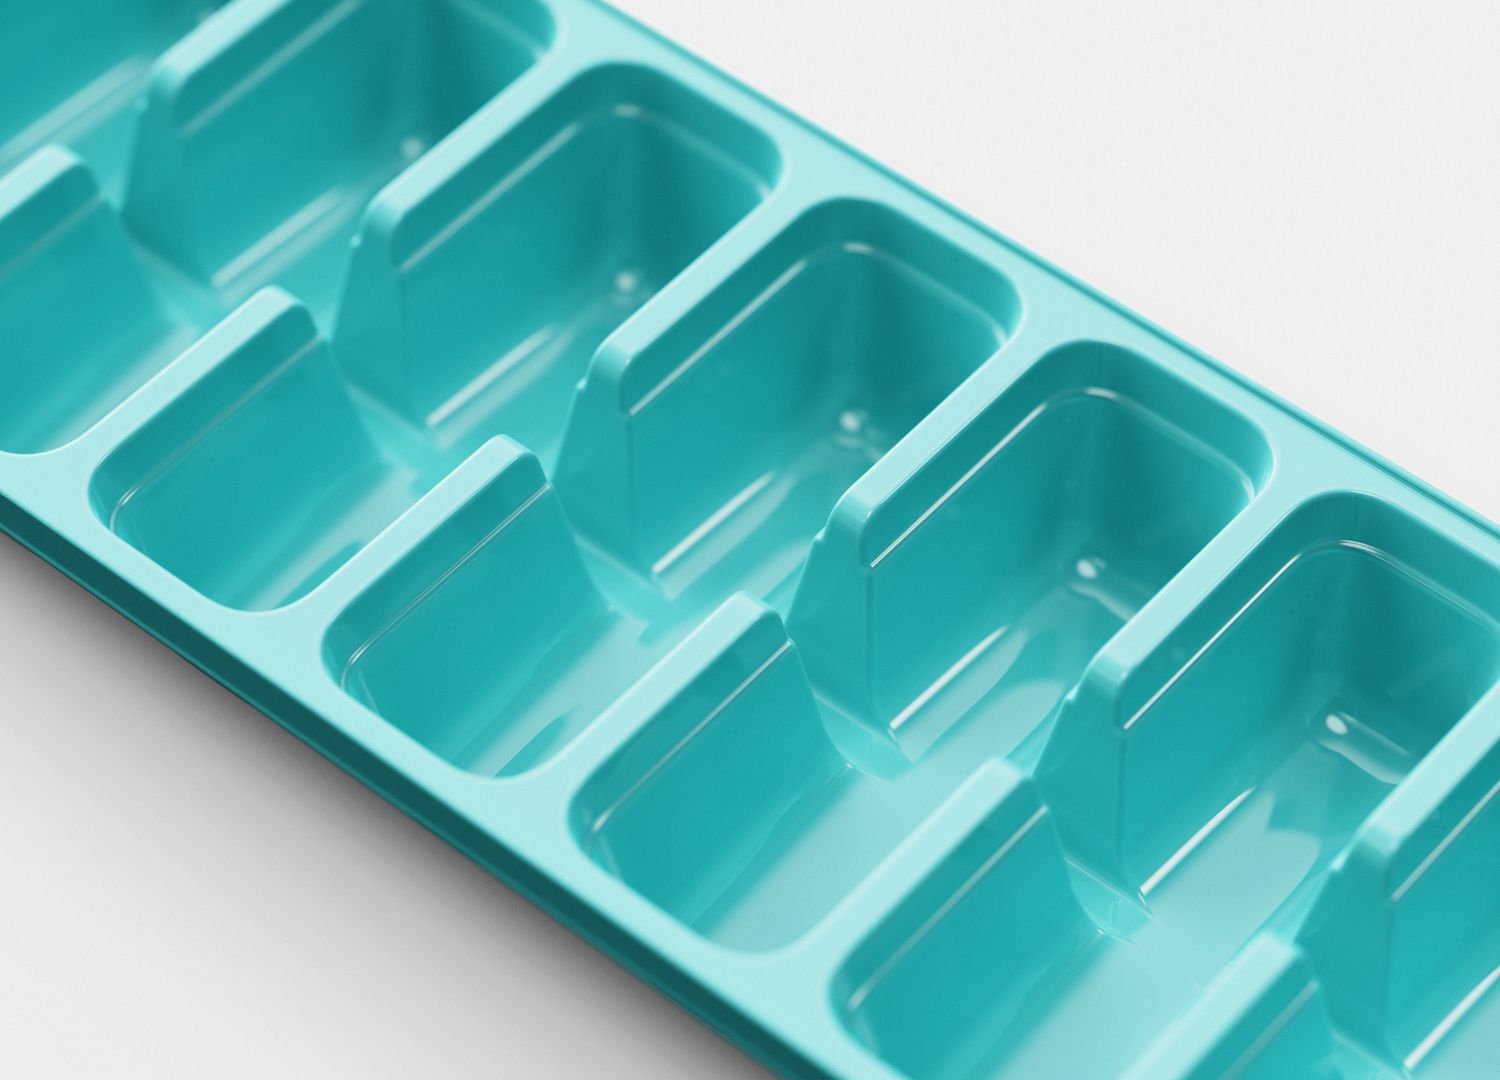 http://designwanted.com/wp-content/uploads/2023/03/Ice-cube-tray-by-Tone-Product-Design-3.jpg